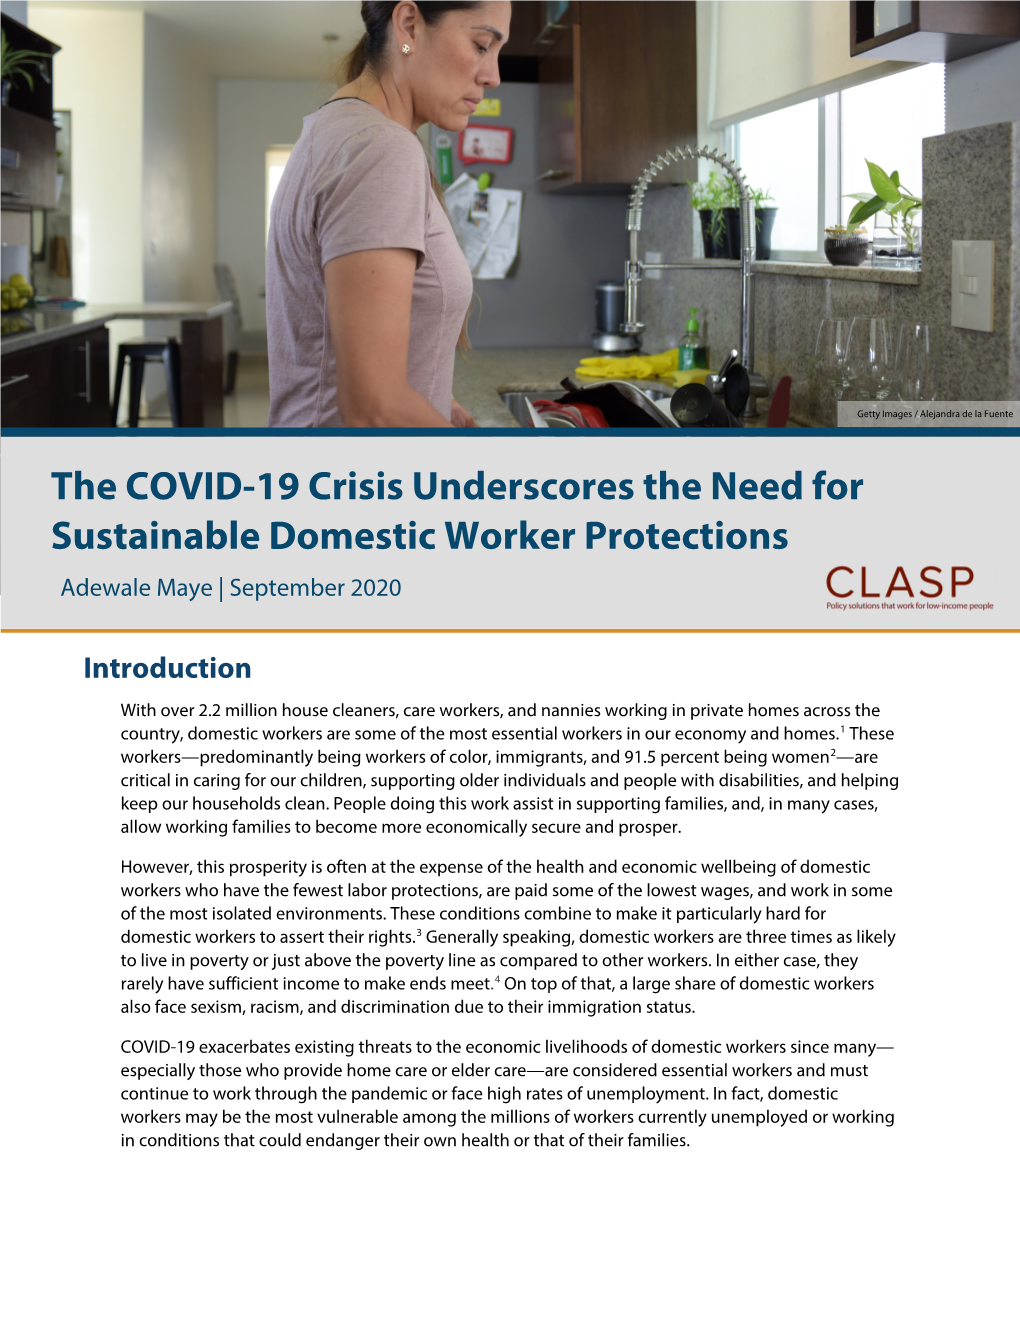 The COVID-19 Crisis Underscores the Need for Sustainable Domestic Worker Protections